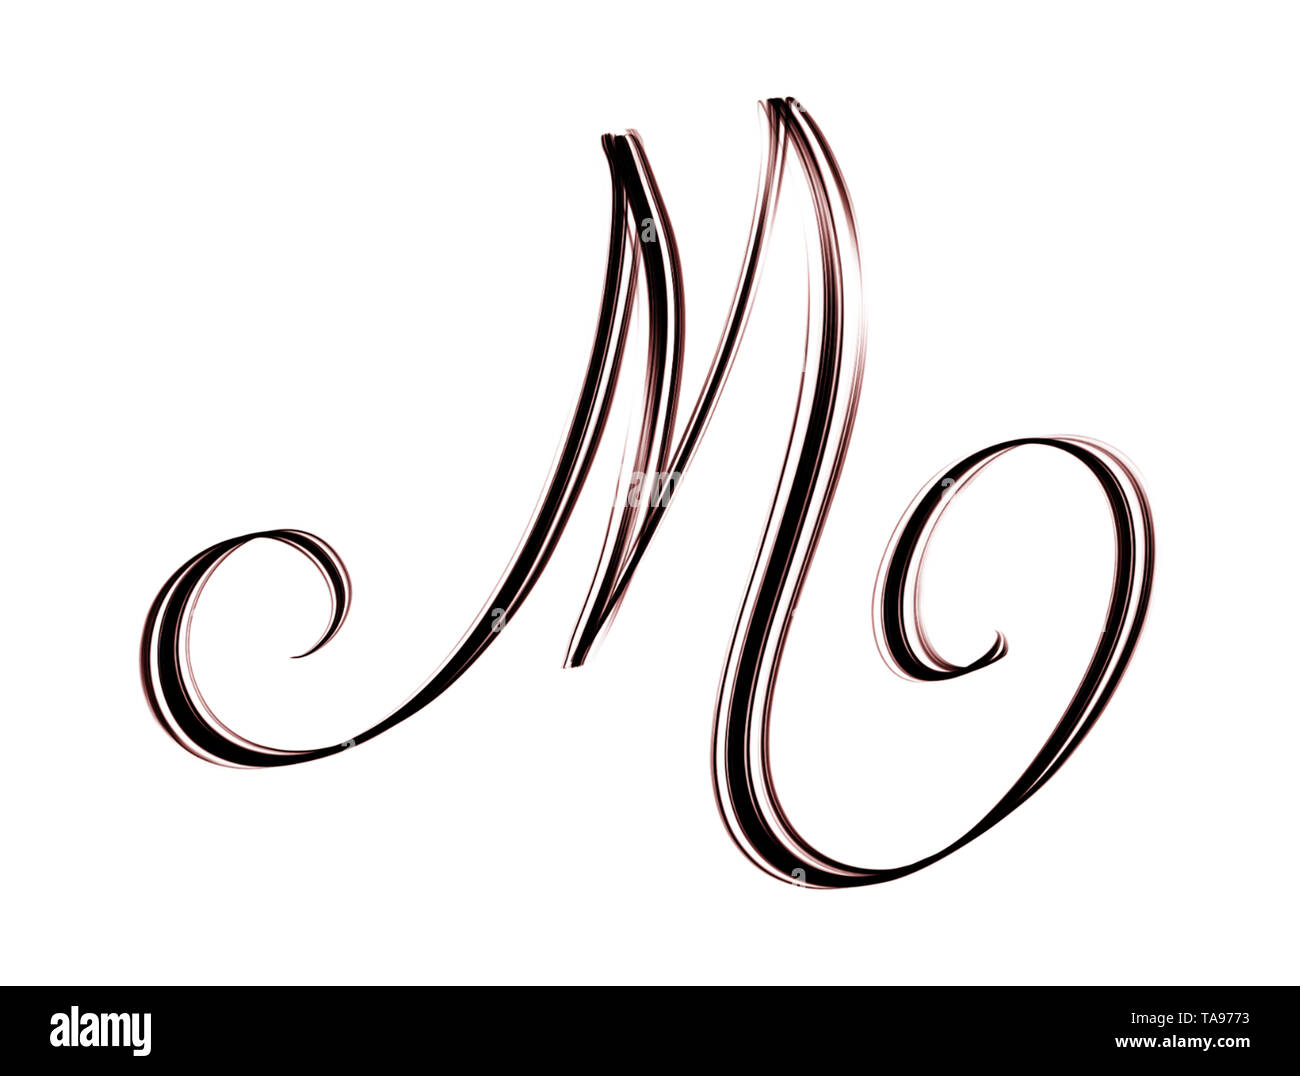 Skewed Capital M Hand Lettering Isolated On White Background Stock Photo Alamy